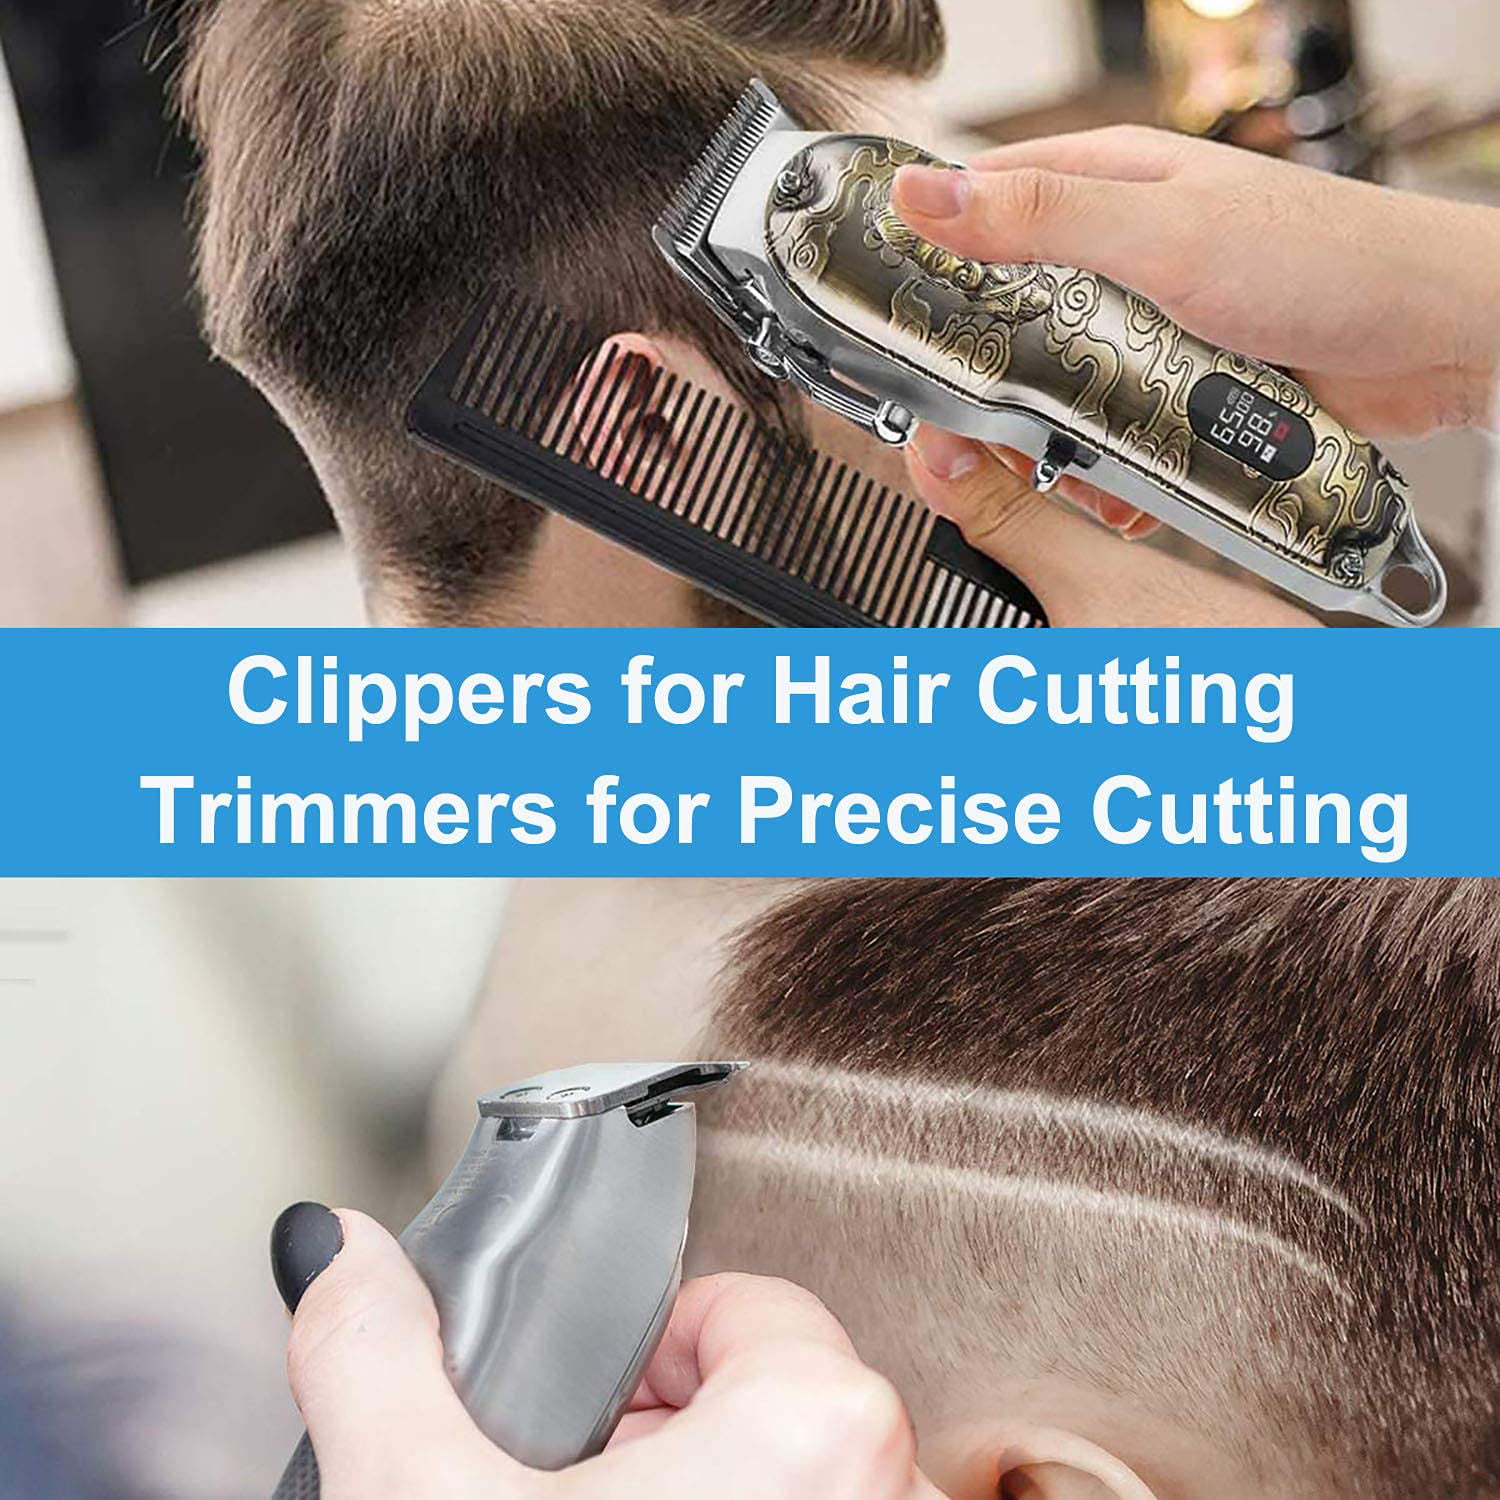 Clippers and Trimmers Set, Suttik Professional Barber Clippers Set, Beard Trimmer Cordless Hair Clippers with T-Blade Close Hair Trimmer, LED Display - Walmart.com